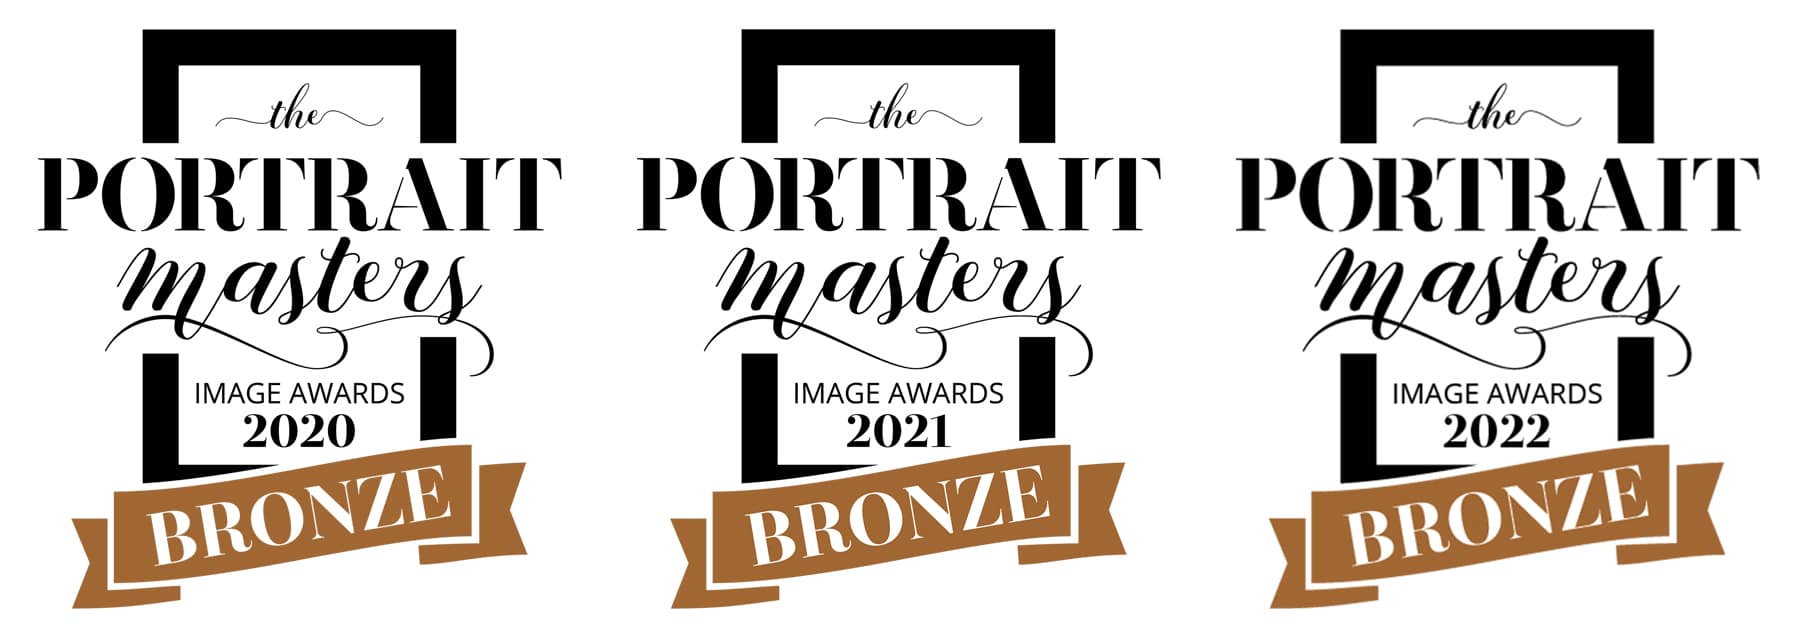 Boudoir photographer Shannon Hemauer won several bronze level awards for images she submitted in 2020, 2021, and 2022.